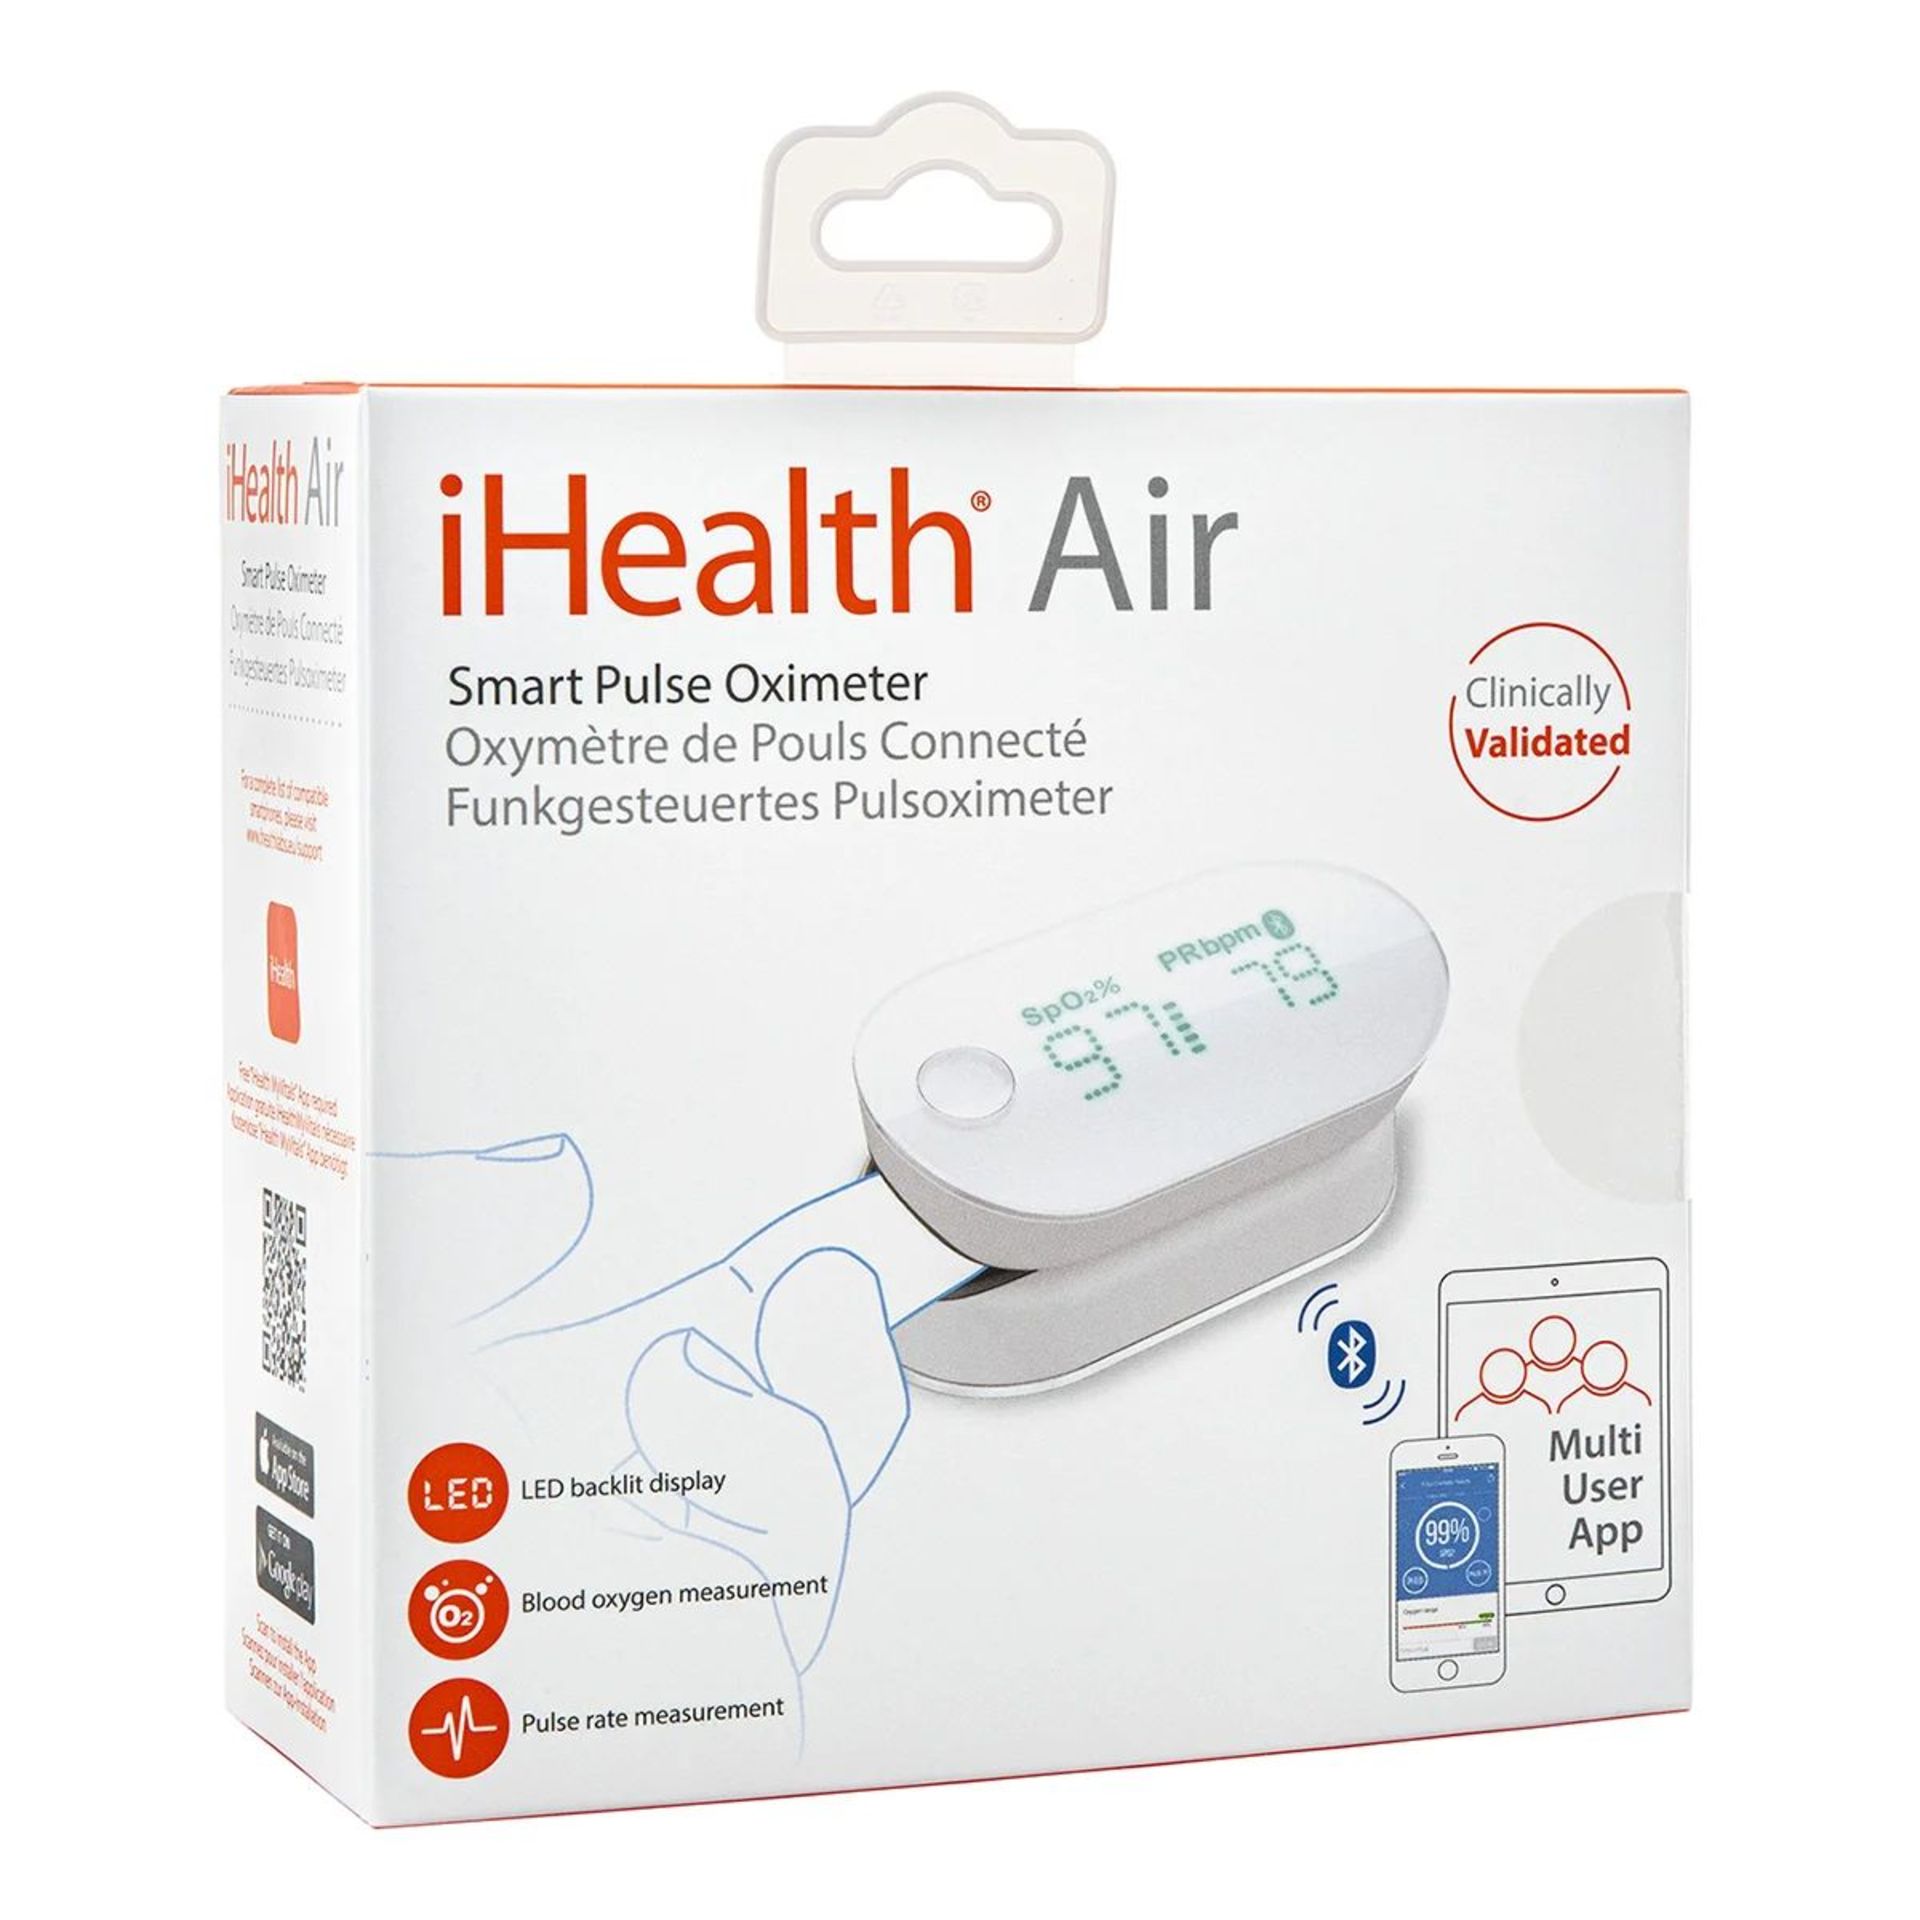 TRADE LOT 12 X BRAND NEW IHEALTH AIR SMART PULSE OXIMETER WIRELESS RRP £80 EACH R9.8